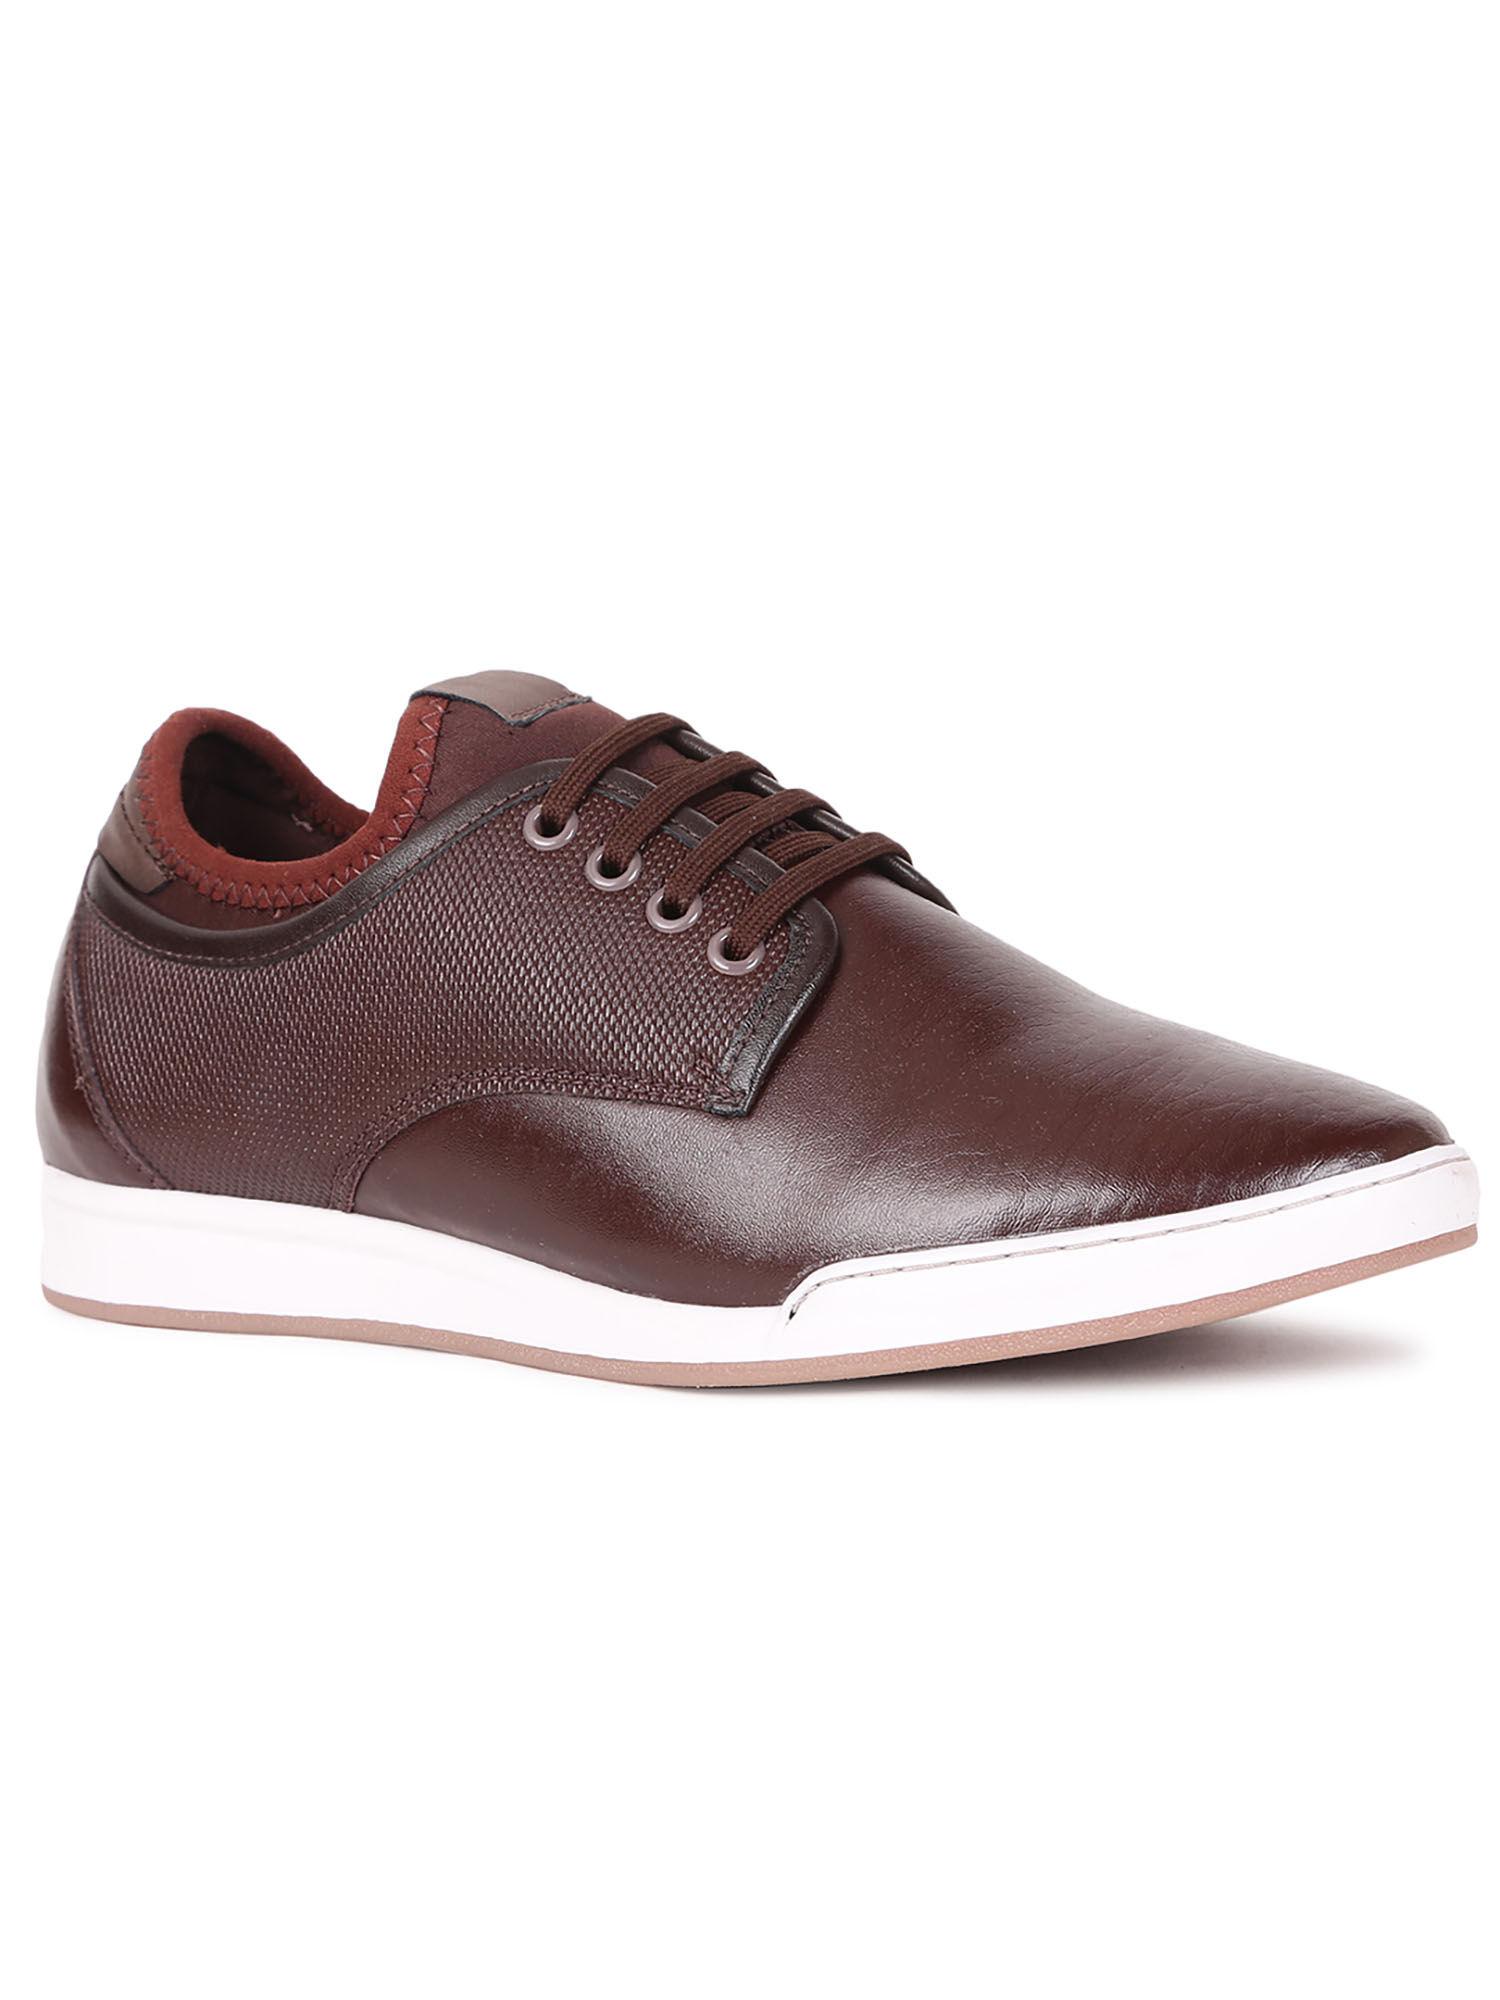 men brown lace-up casual shoes